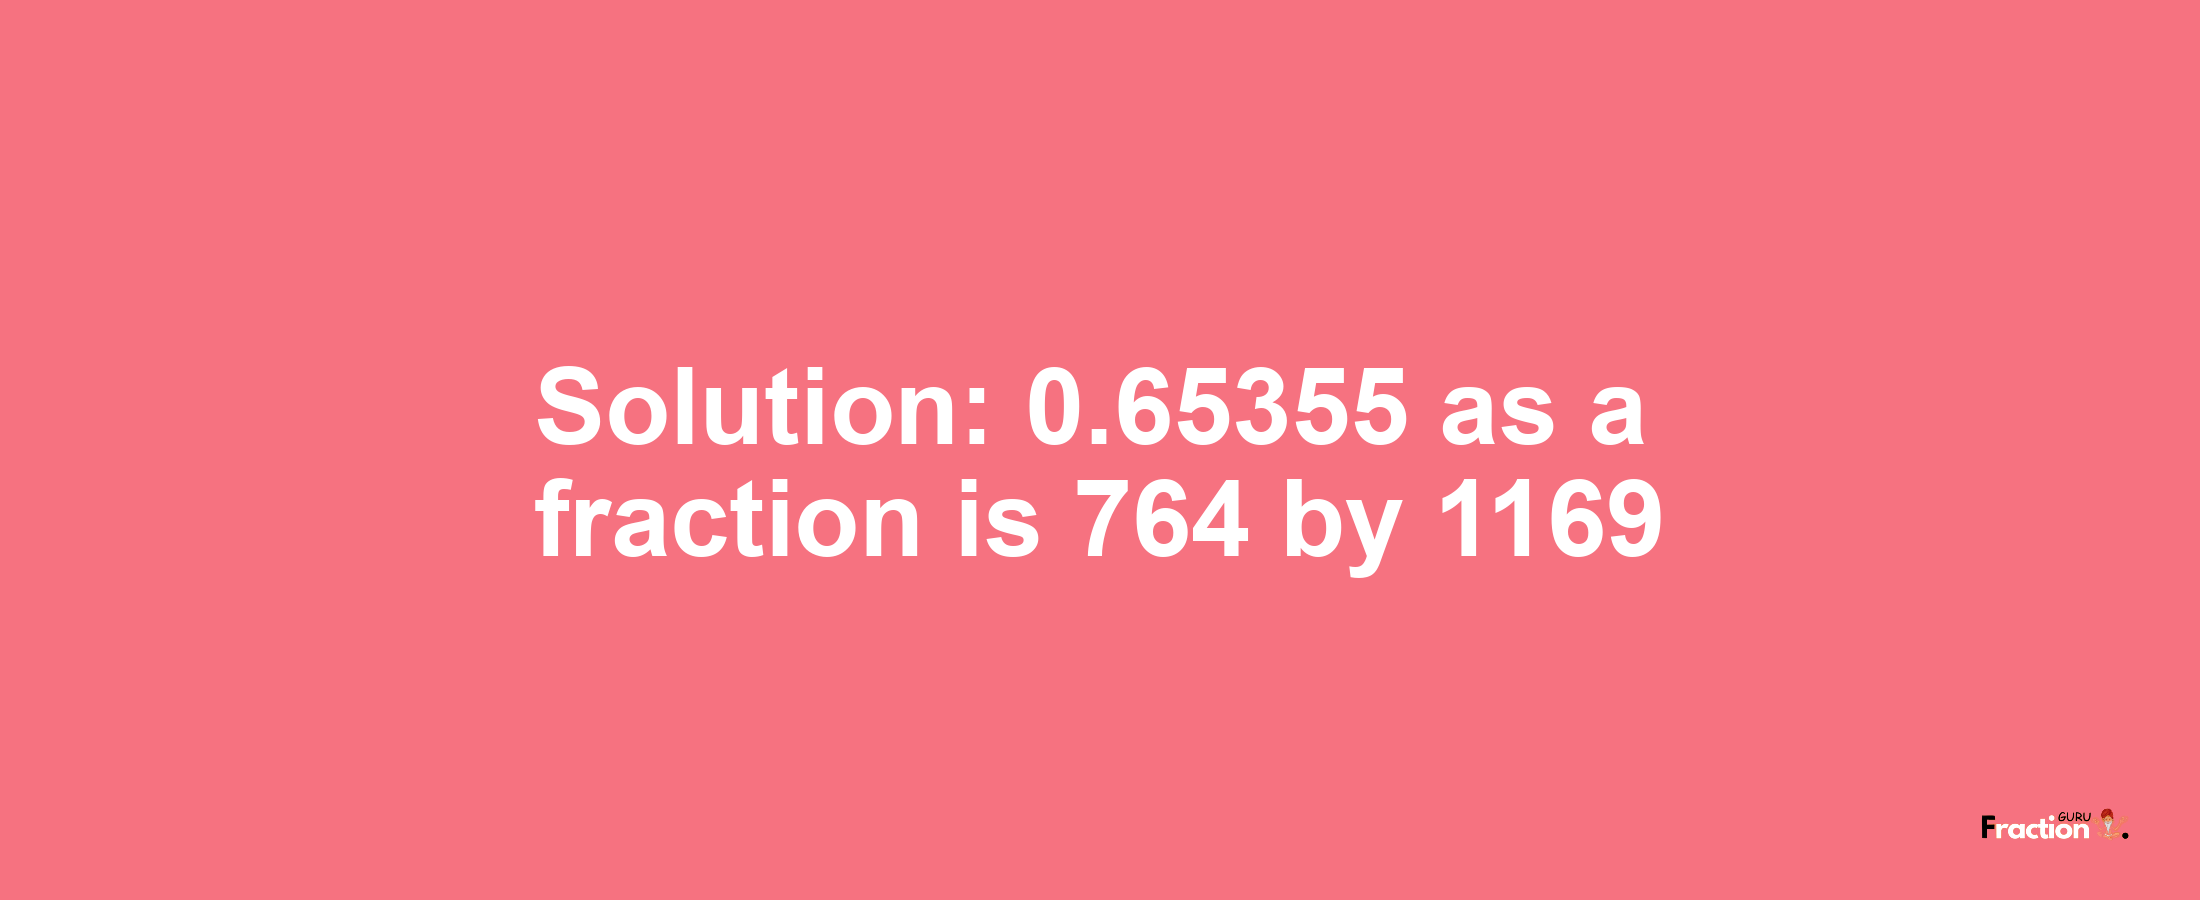 Solution:0.65355 as a fraction is 764/1169